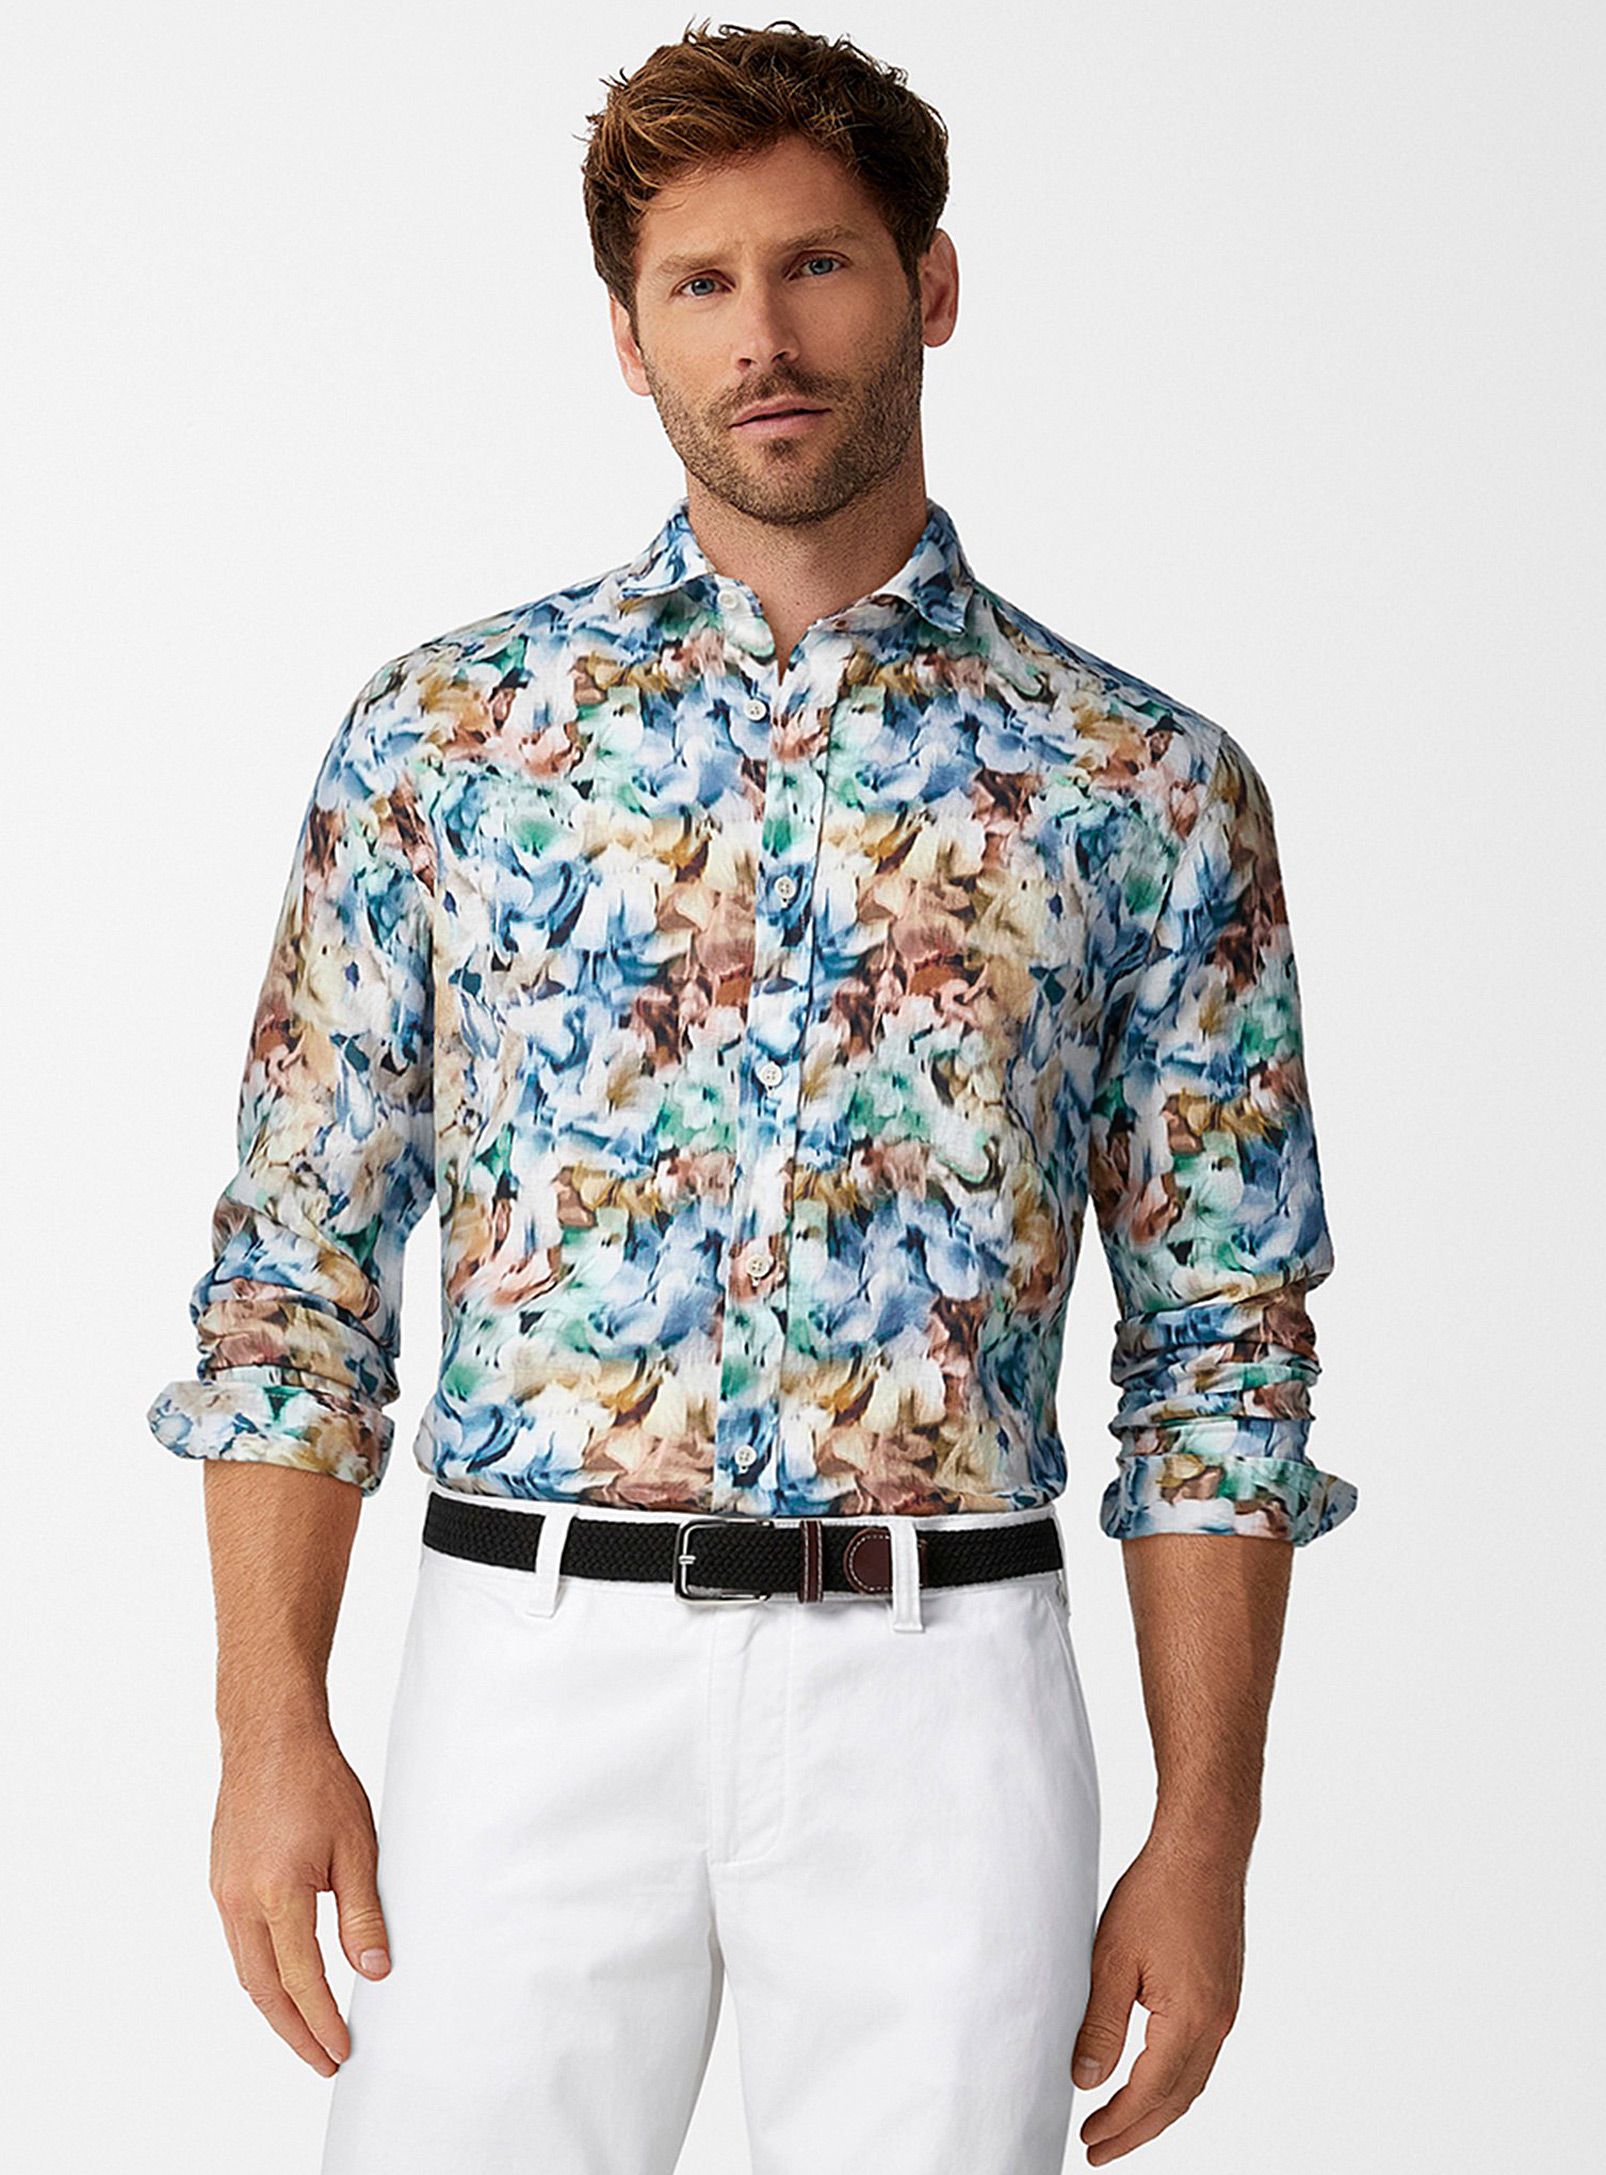 Olymp - Men's Abstract floral pure linen shirt